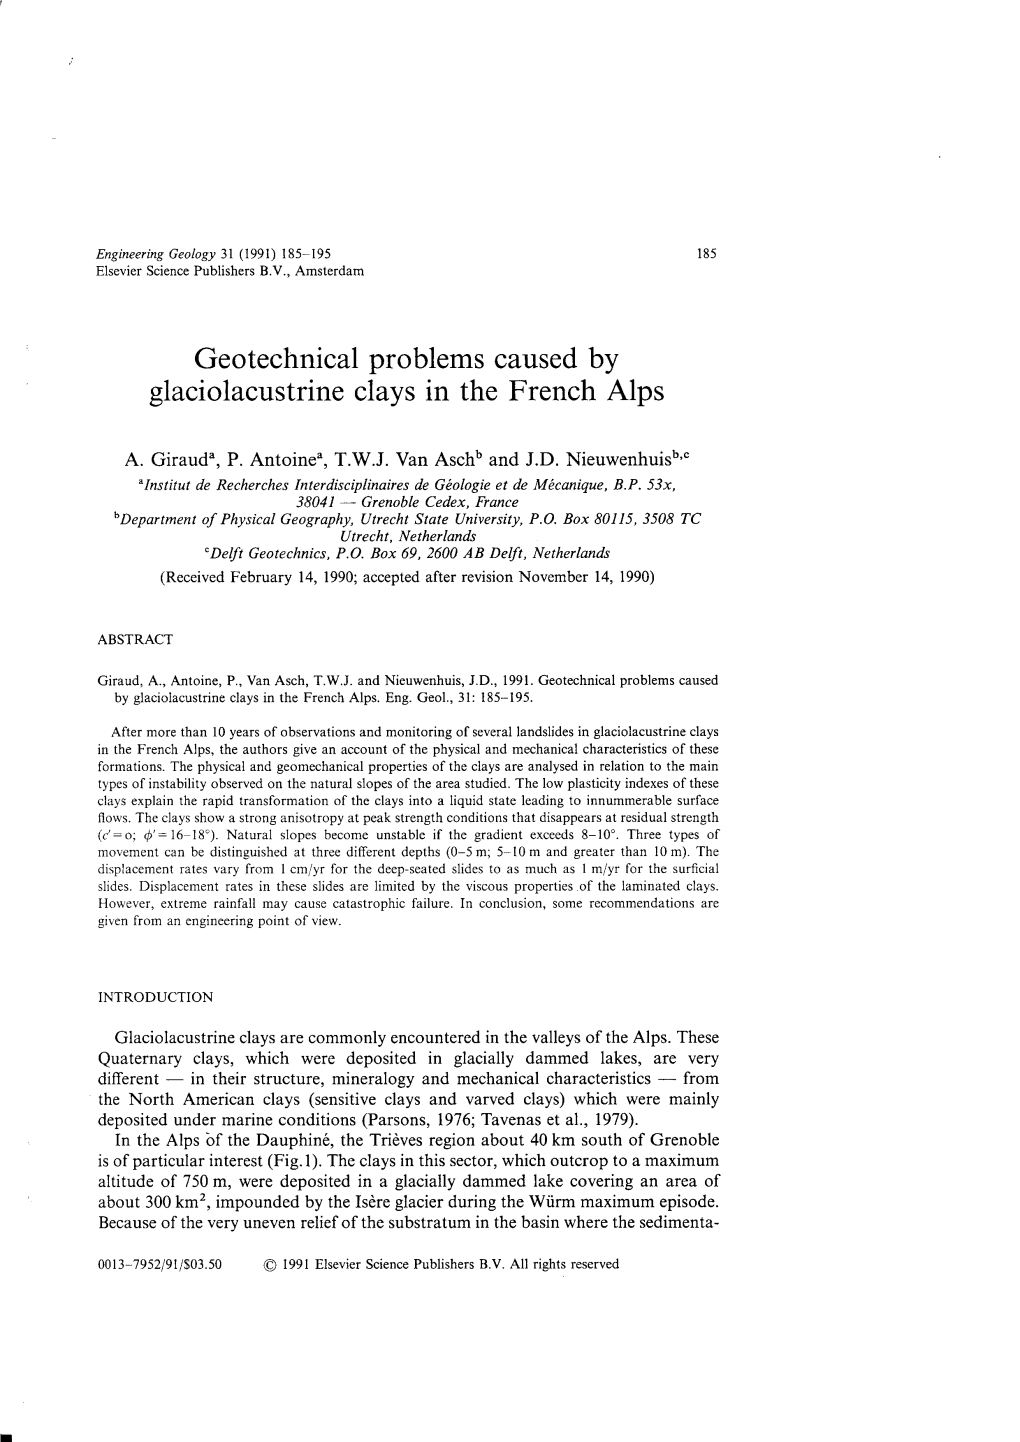 Geotechnical Problems Caused by Glaciolacustrine Clays in the French